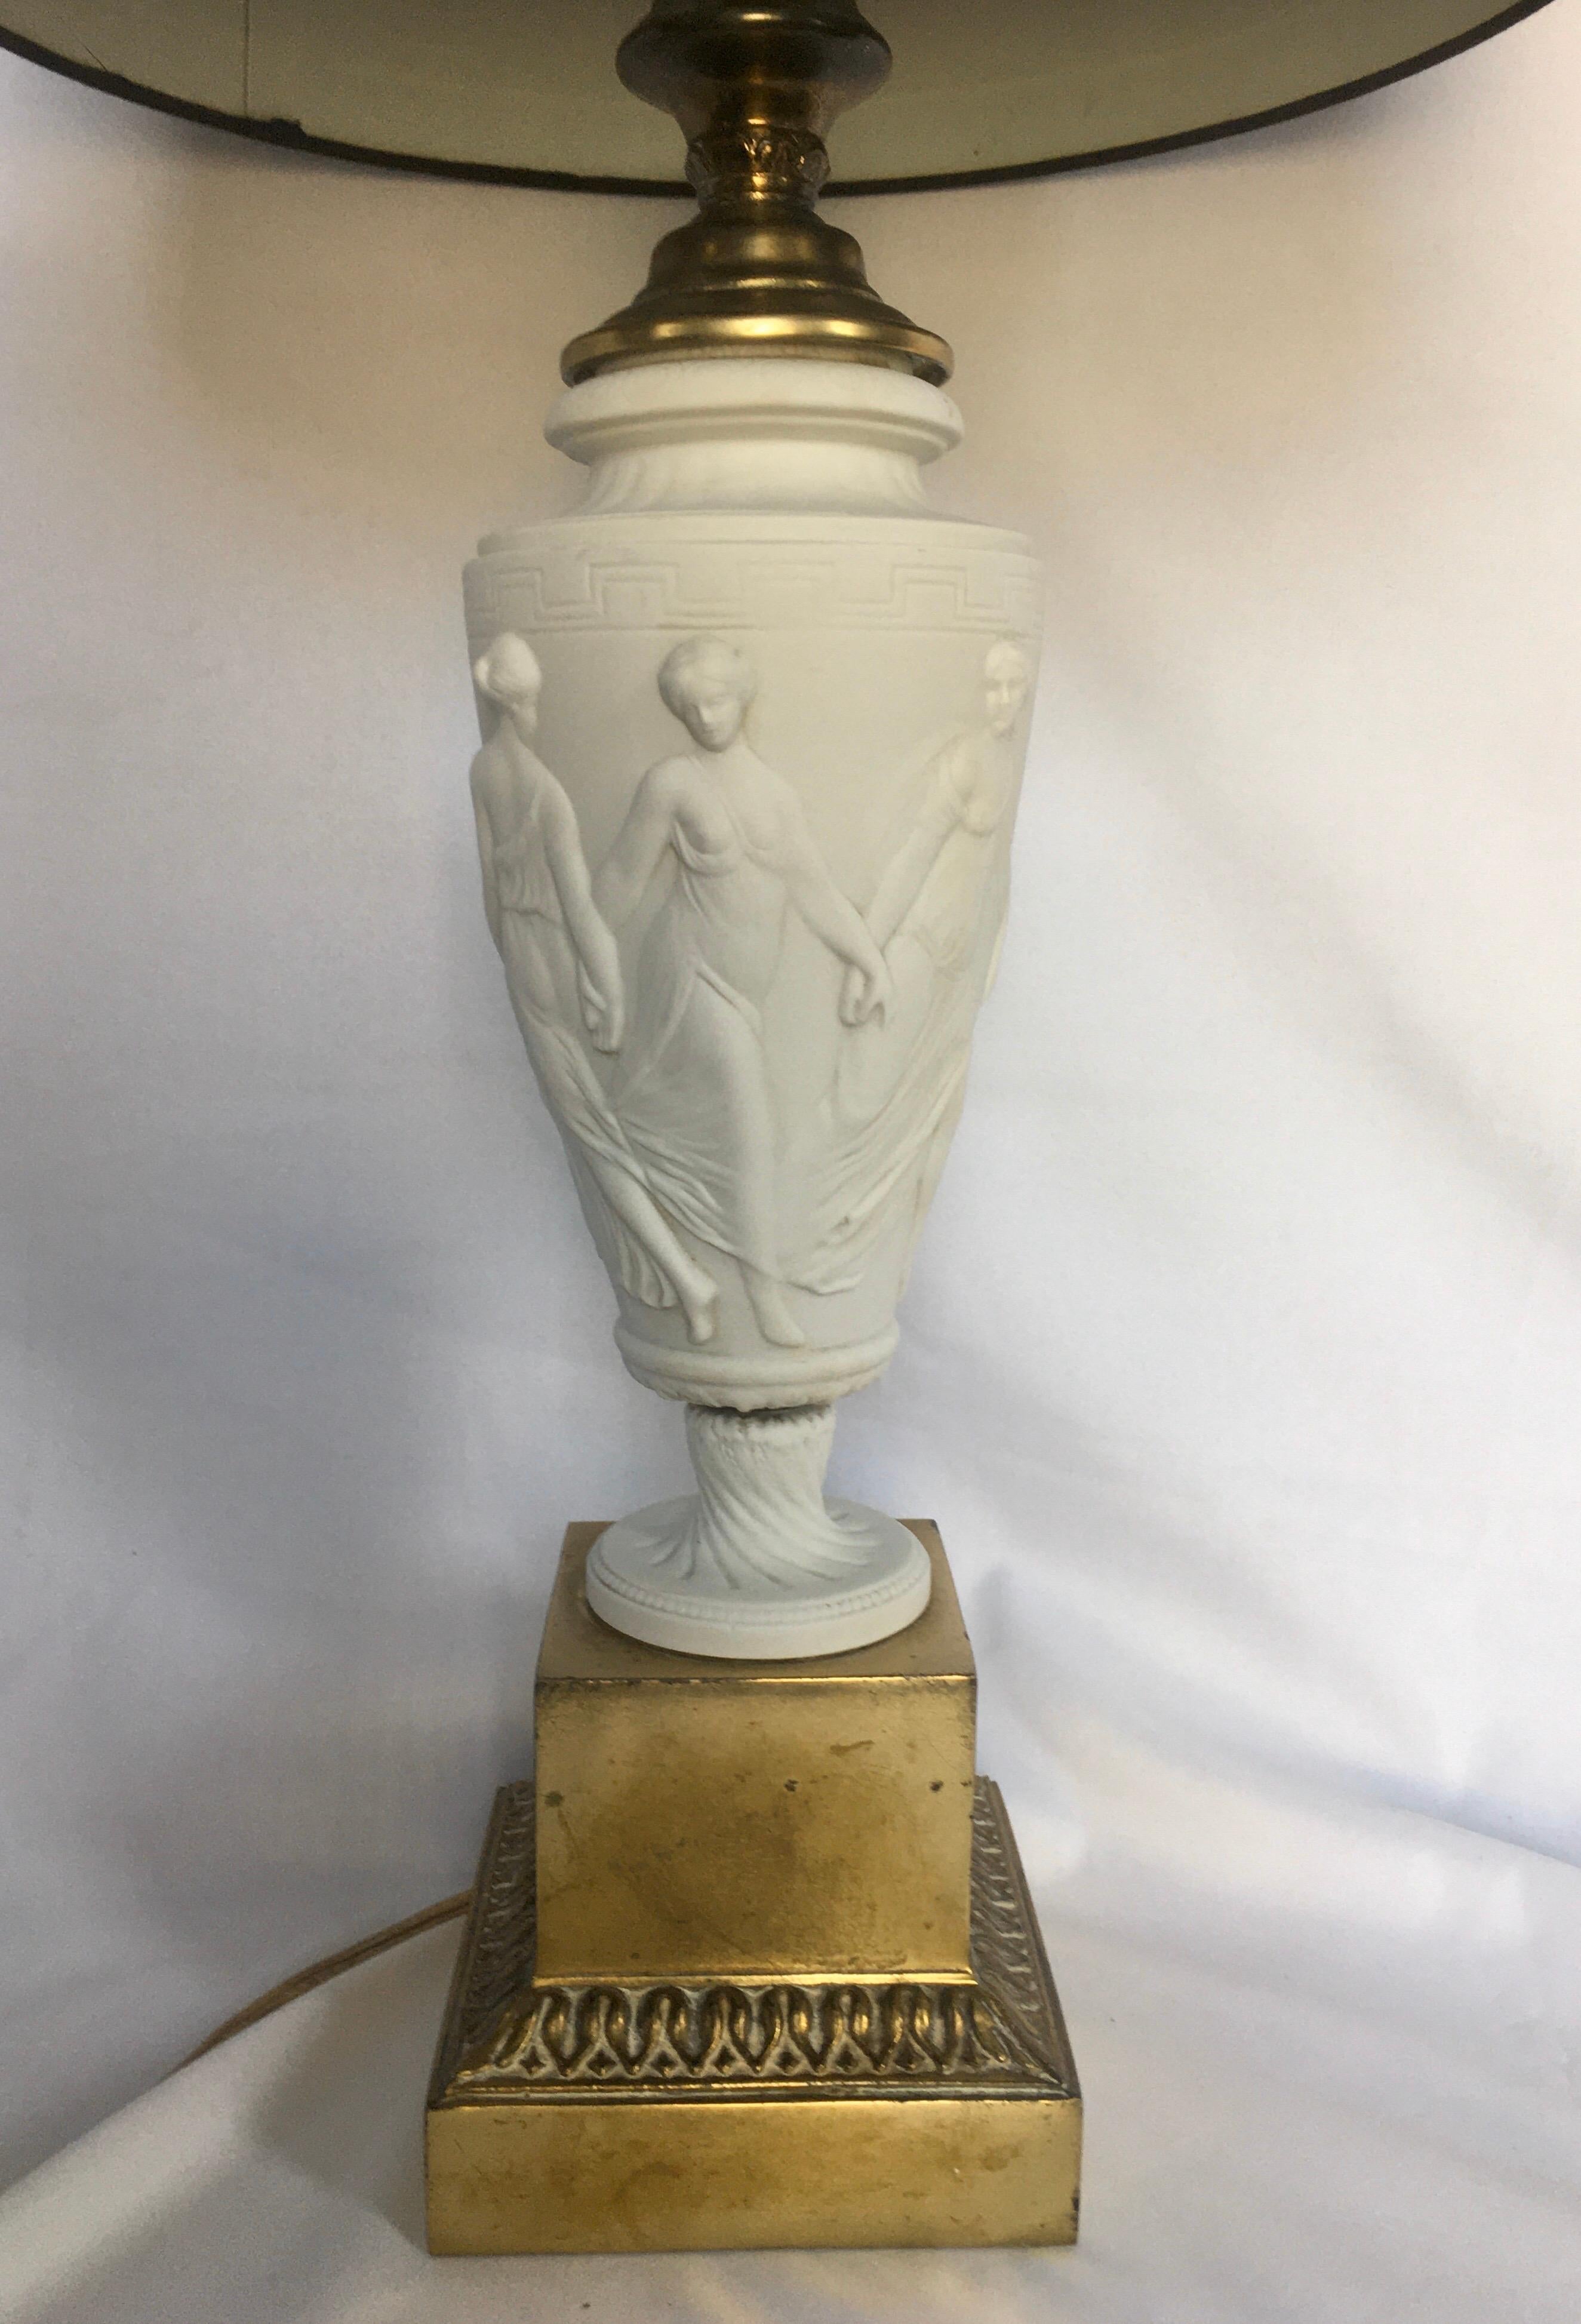 Neoclassical Bisque Porcelain Figurative Greek Key Urn Table Lamp, Bavaria In Good Condition For Sale In Lambertville, NJ